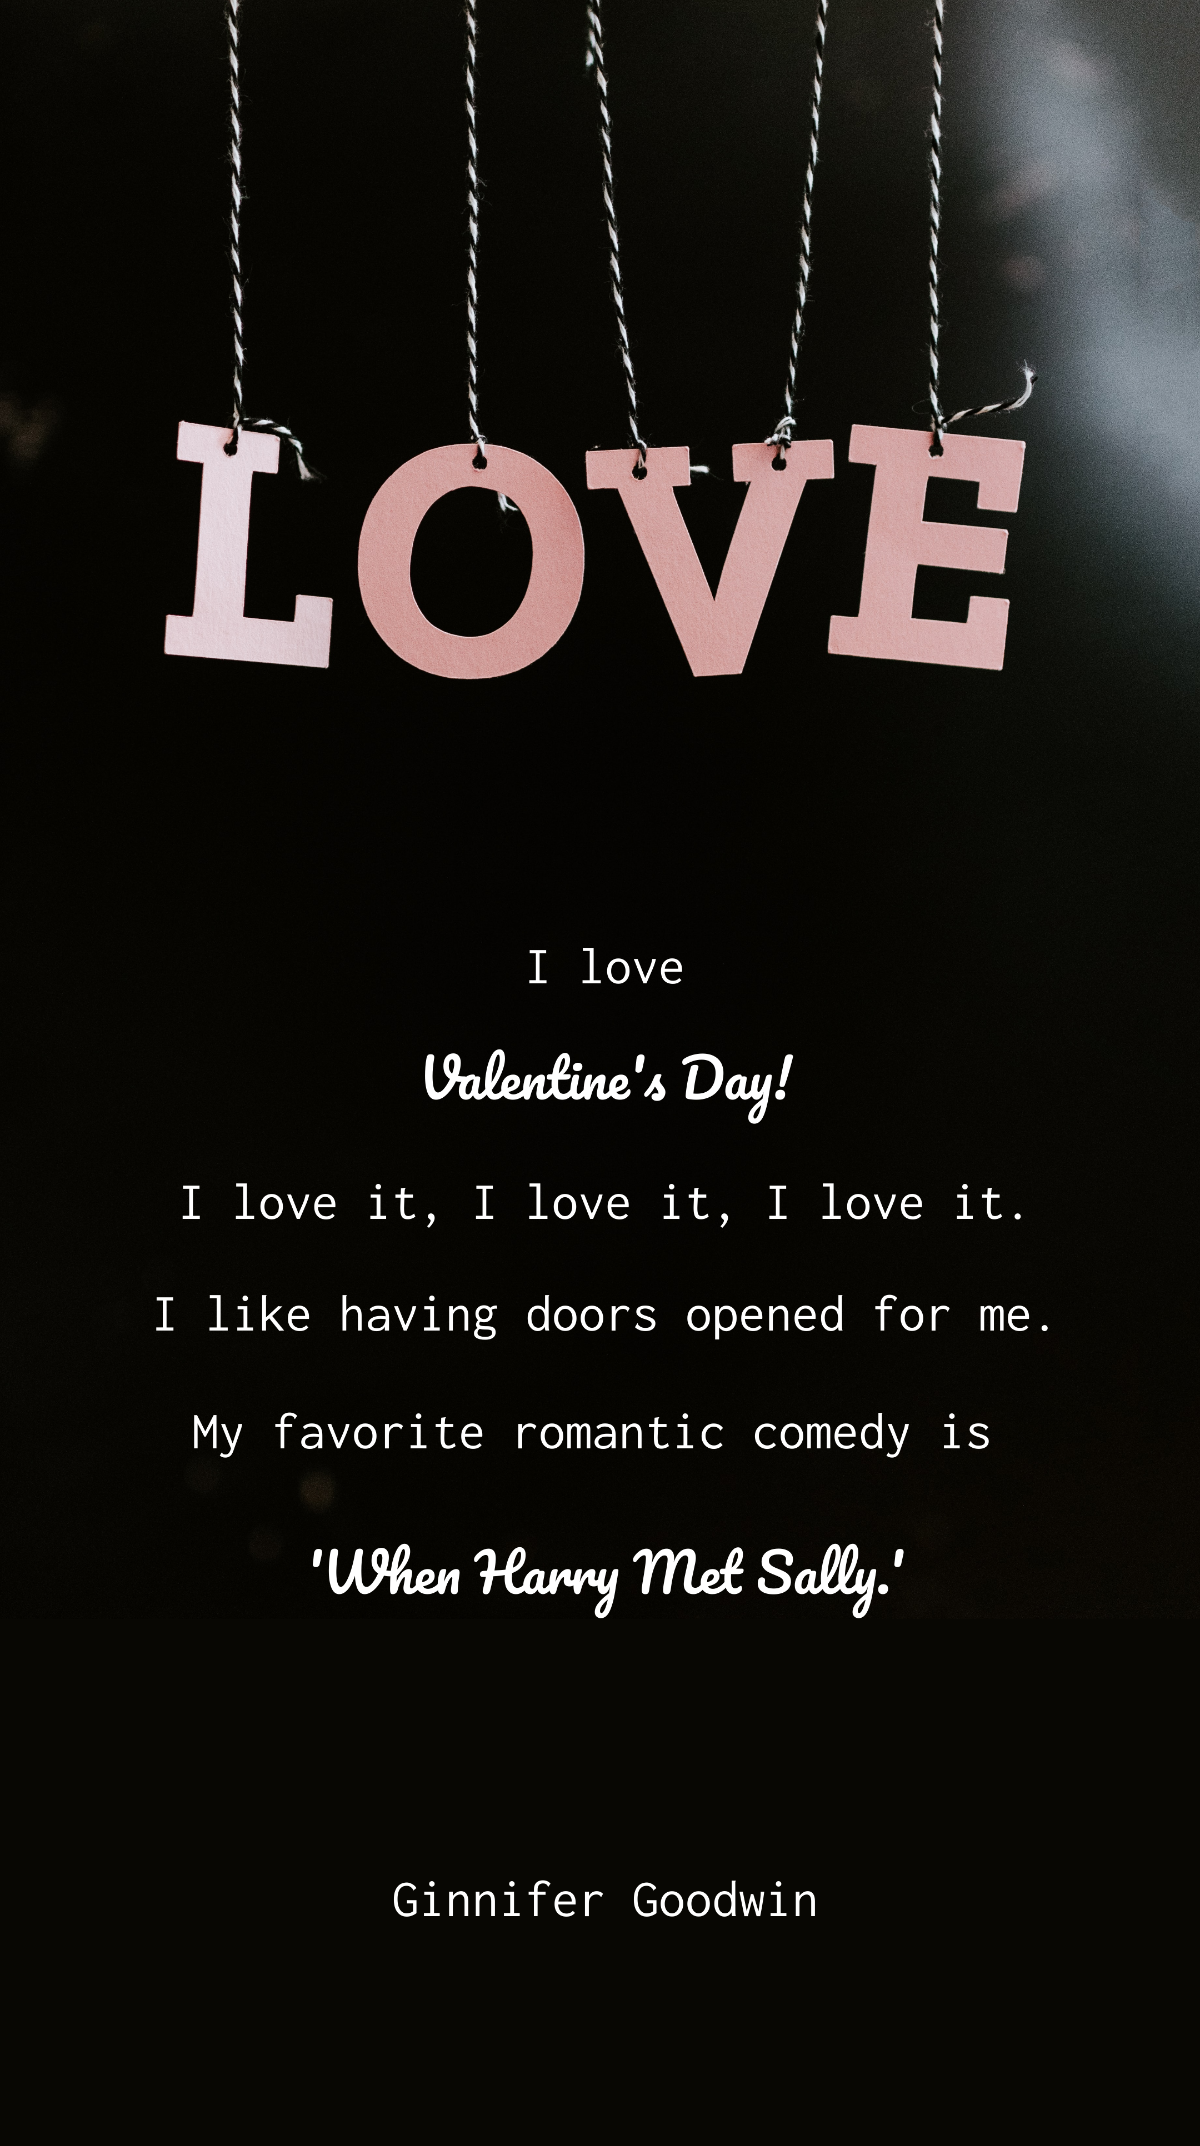 Ginnifer Goodwin - I love Valentine's Day! I love it, I love it, I love it. I like having doors opened for me. My favorite romantic comedy is 'When Harry Met Sally.' Template